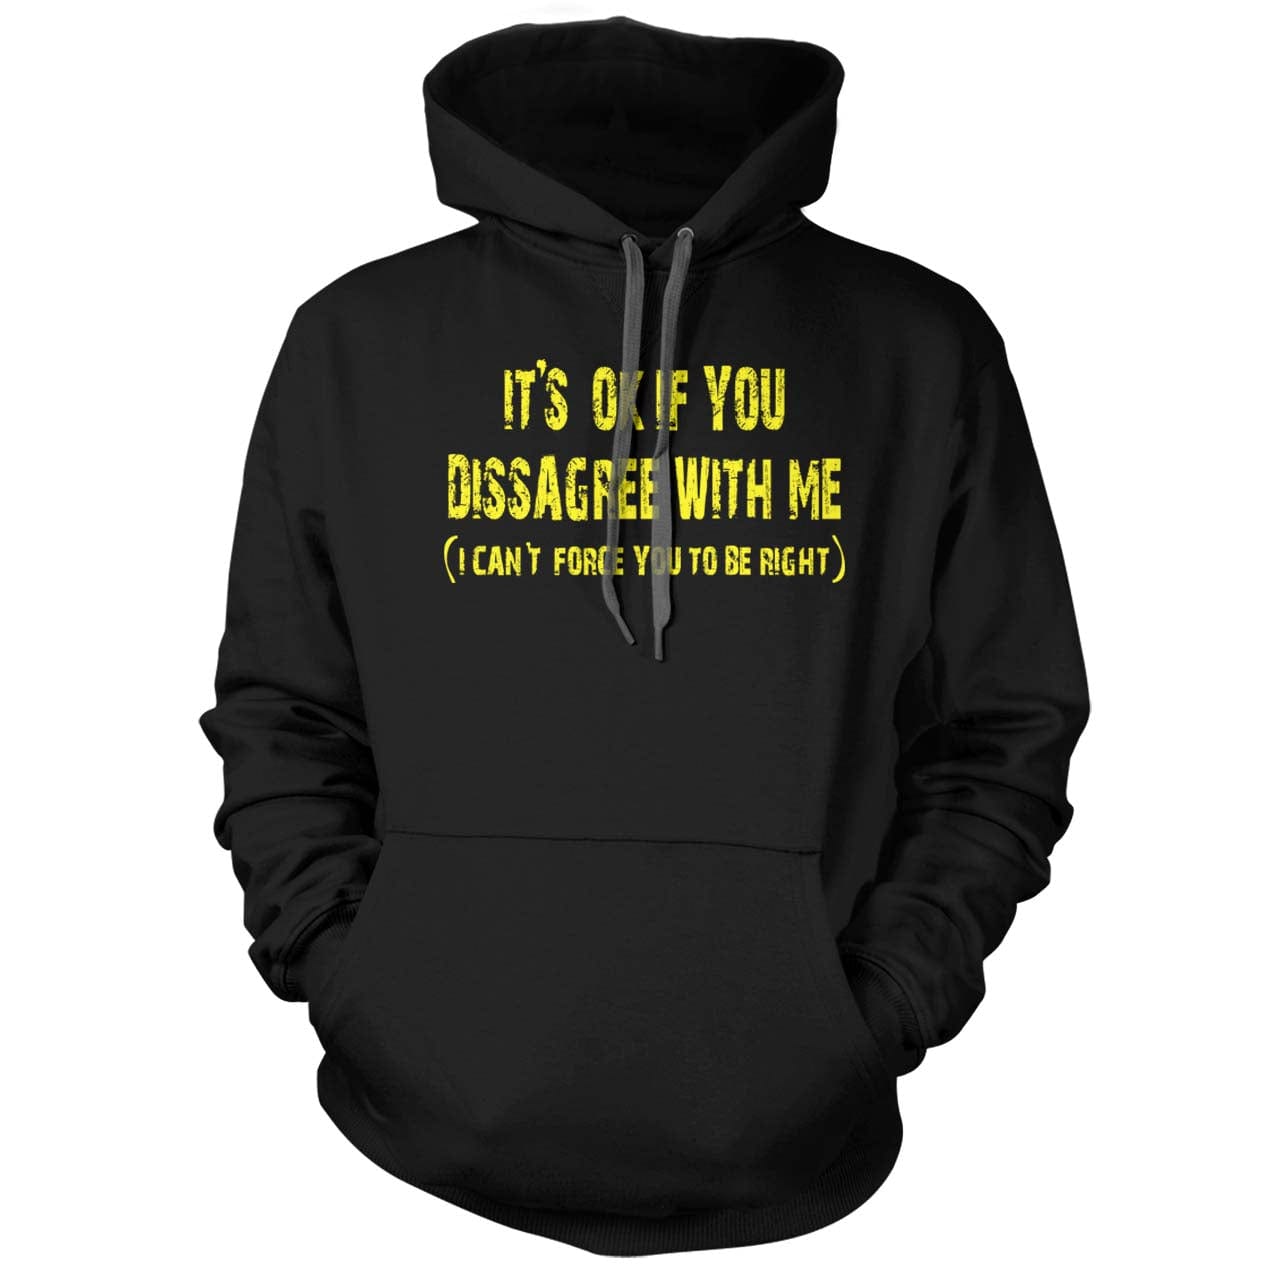 It's ok if you disagree with me Hoodie